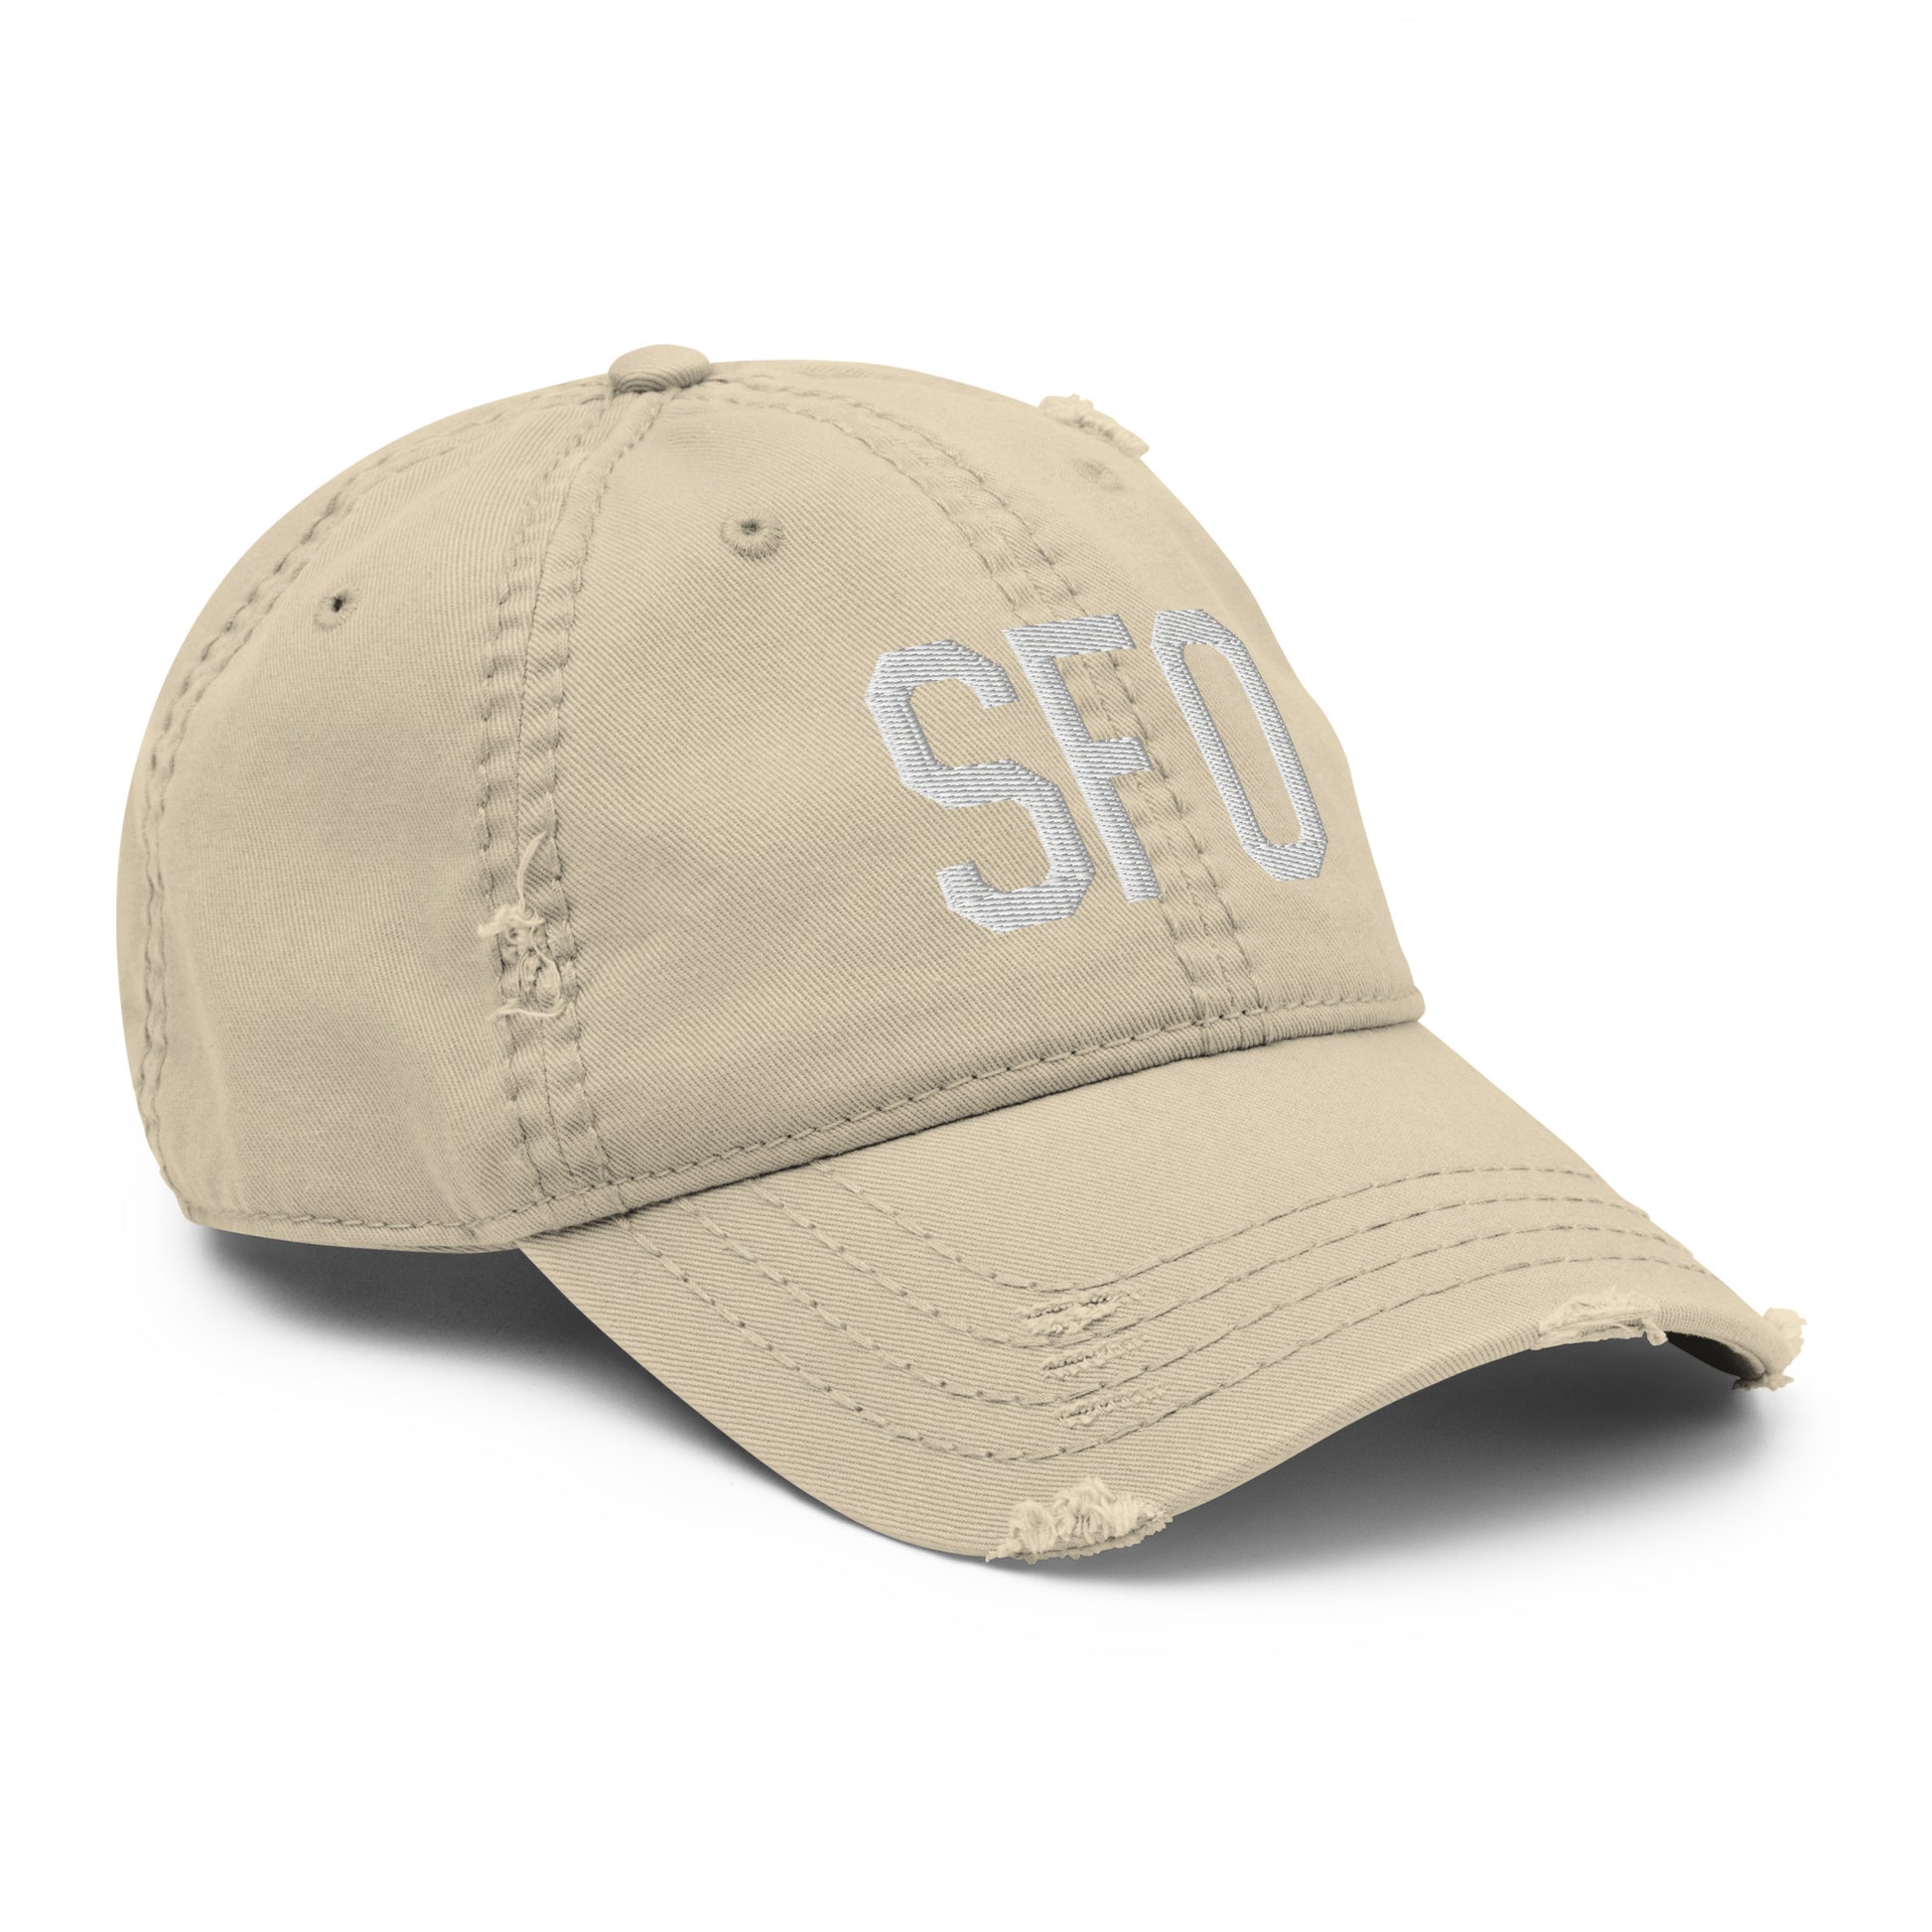 Airport Code Distressed Hat - White • SFO San Francisco • YHM Designs - Image 20